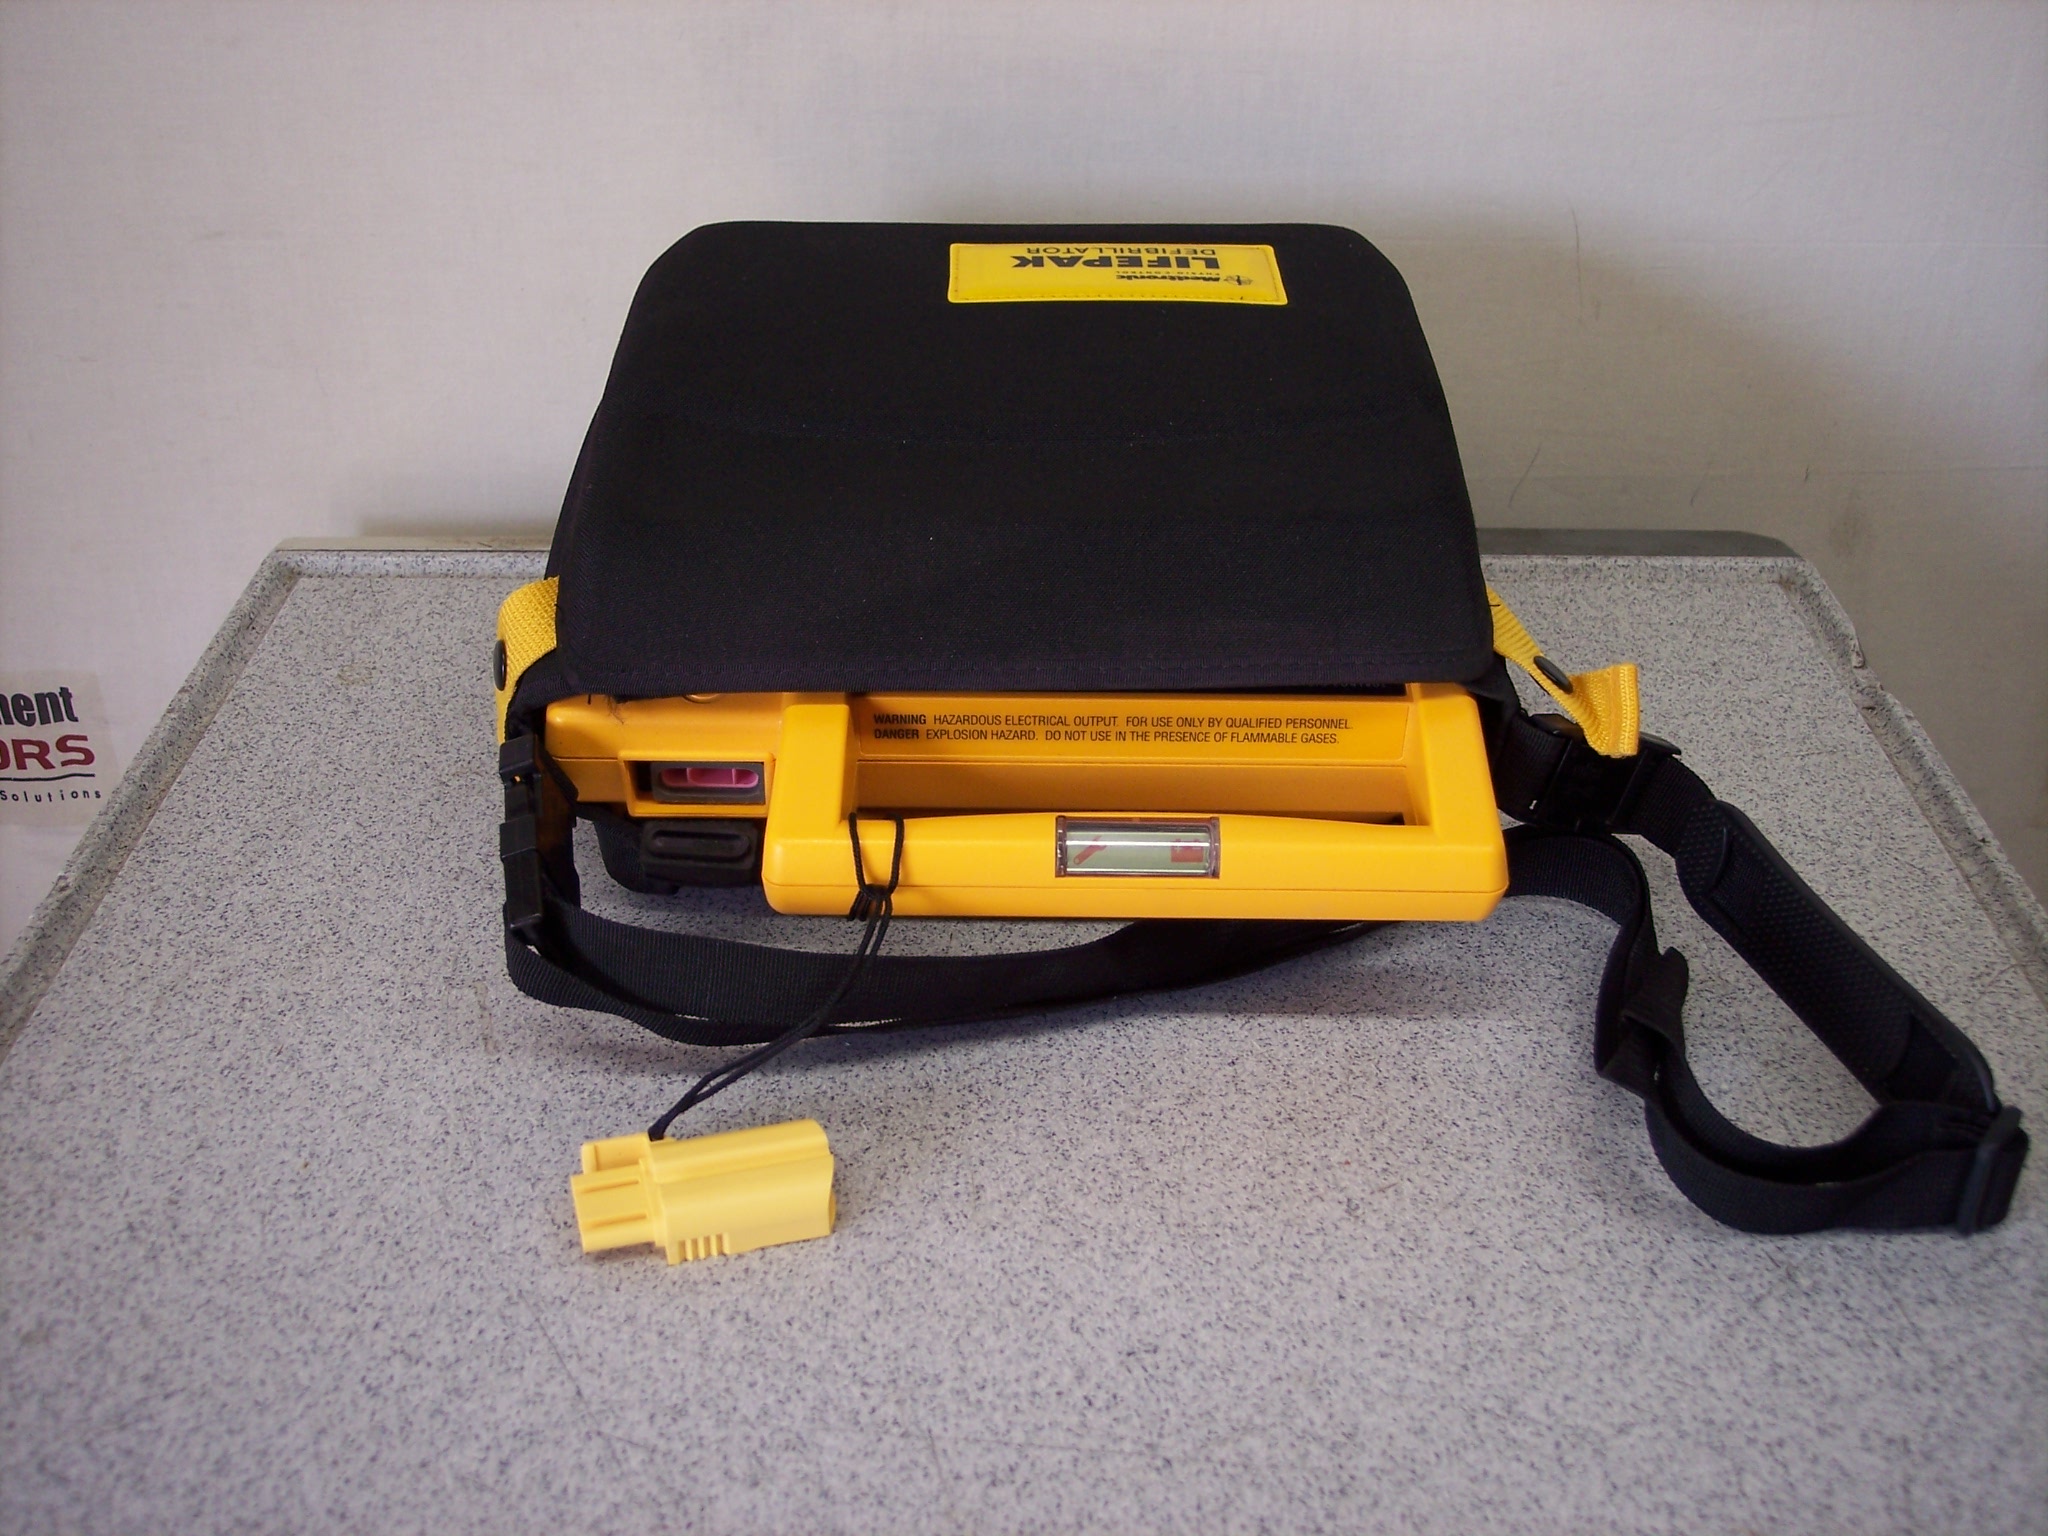 Medtronic Physio-Control Lifepak 500 Biphasic AED (Automated External Defibrillator)500